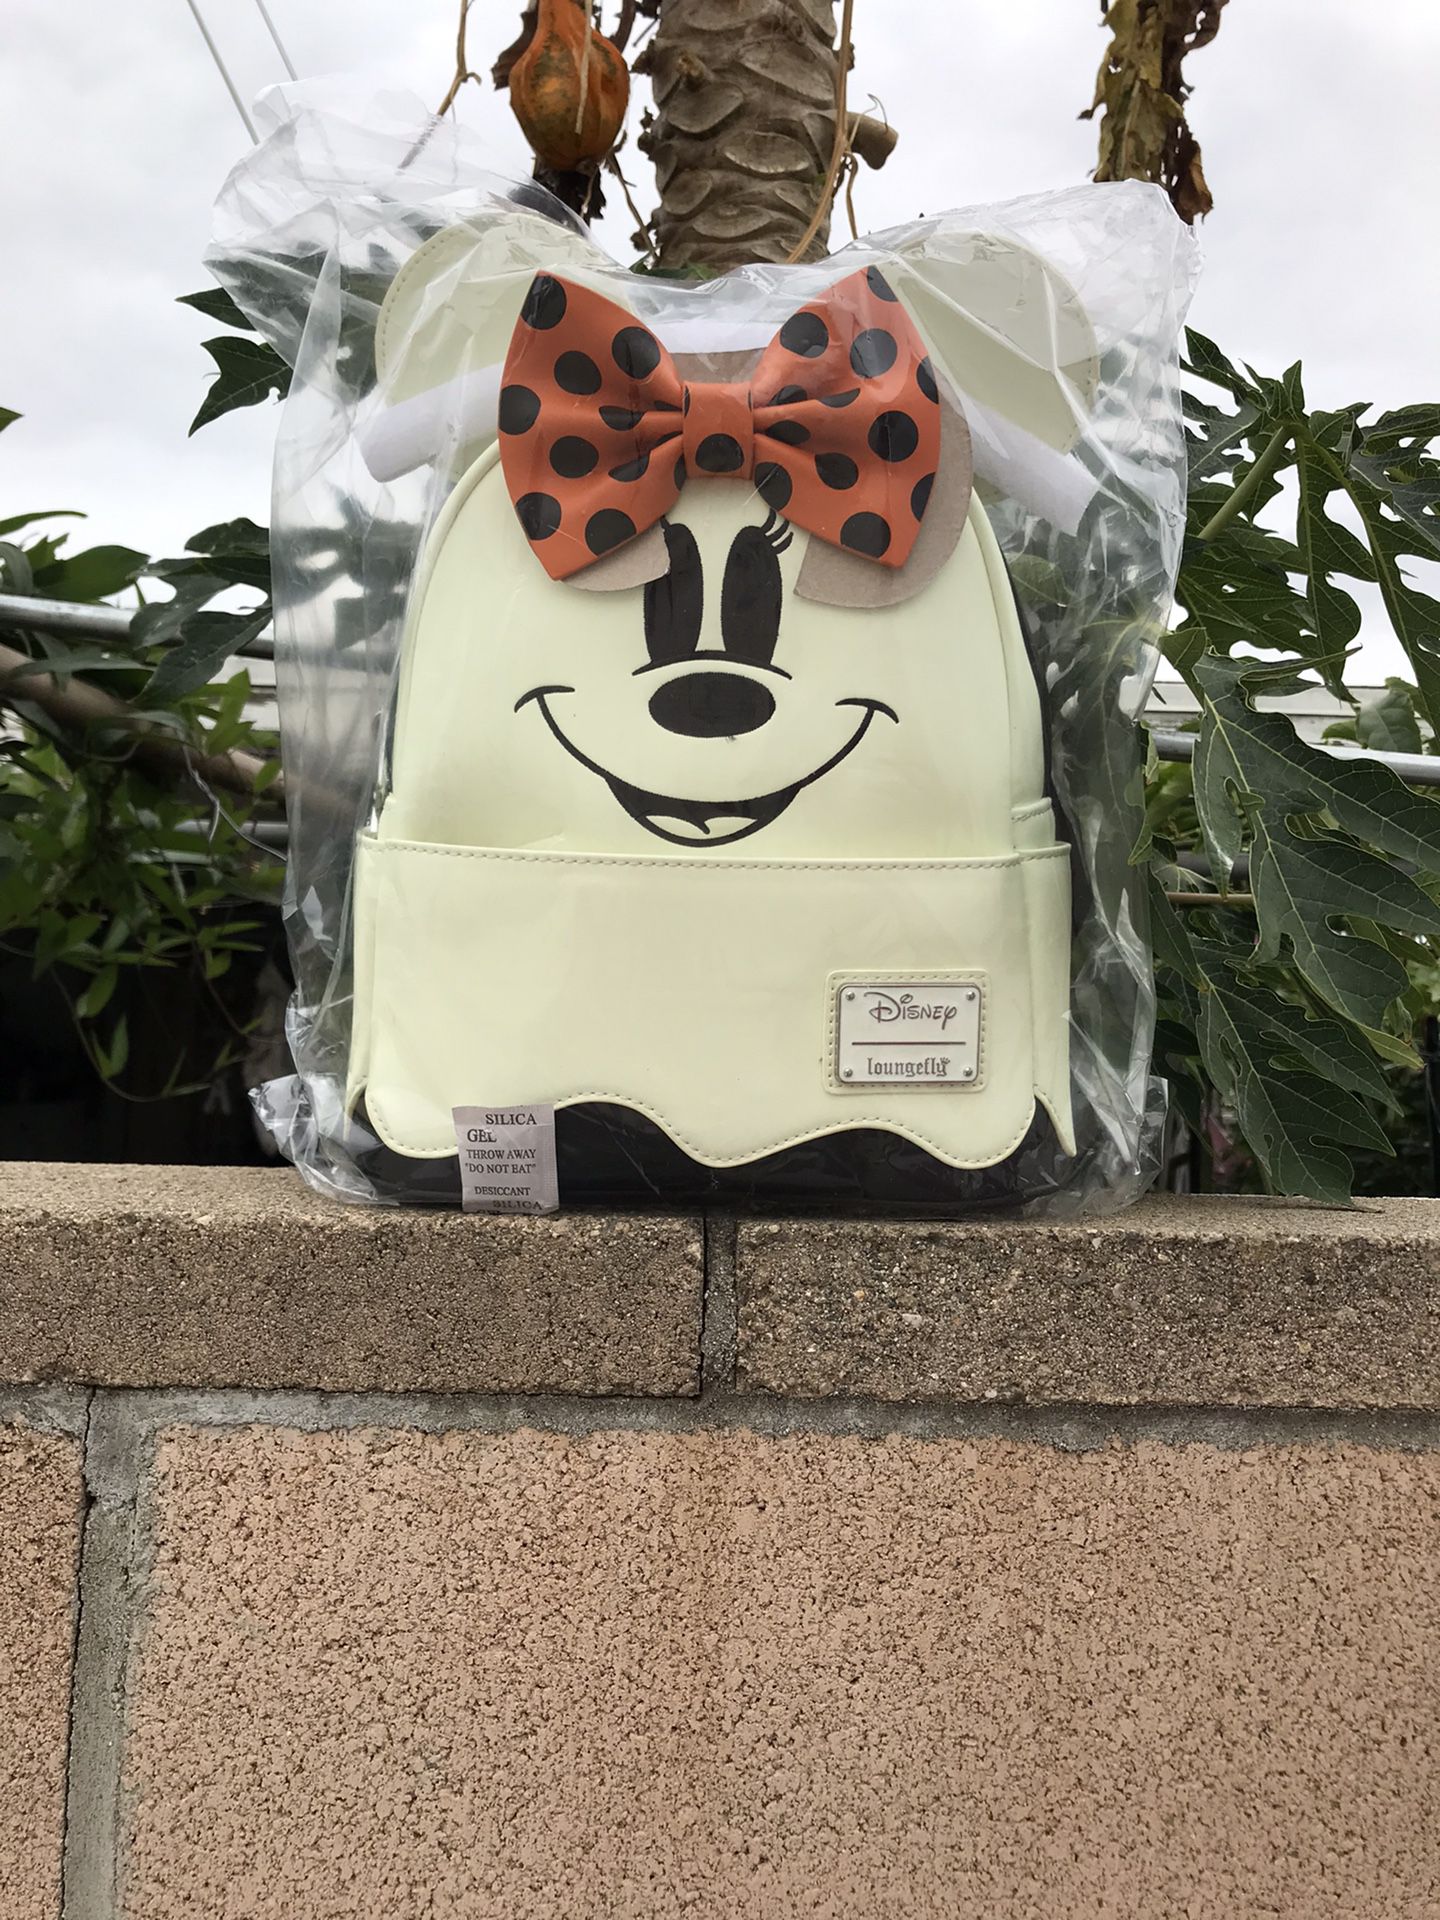 DISNEY LOUNGEFLY MINNIE MOUSE GHOST MINNIE GLOW IN THE DARK MINI BACKPACK 